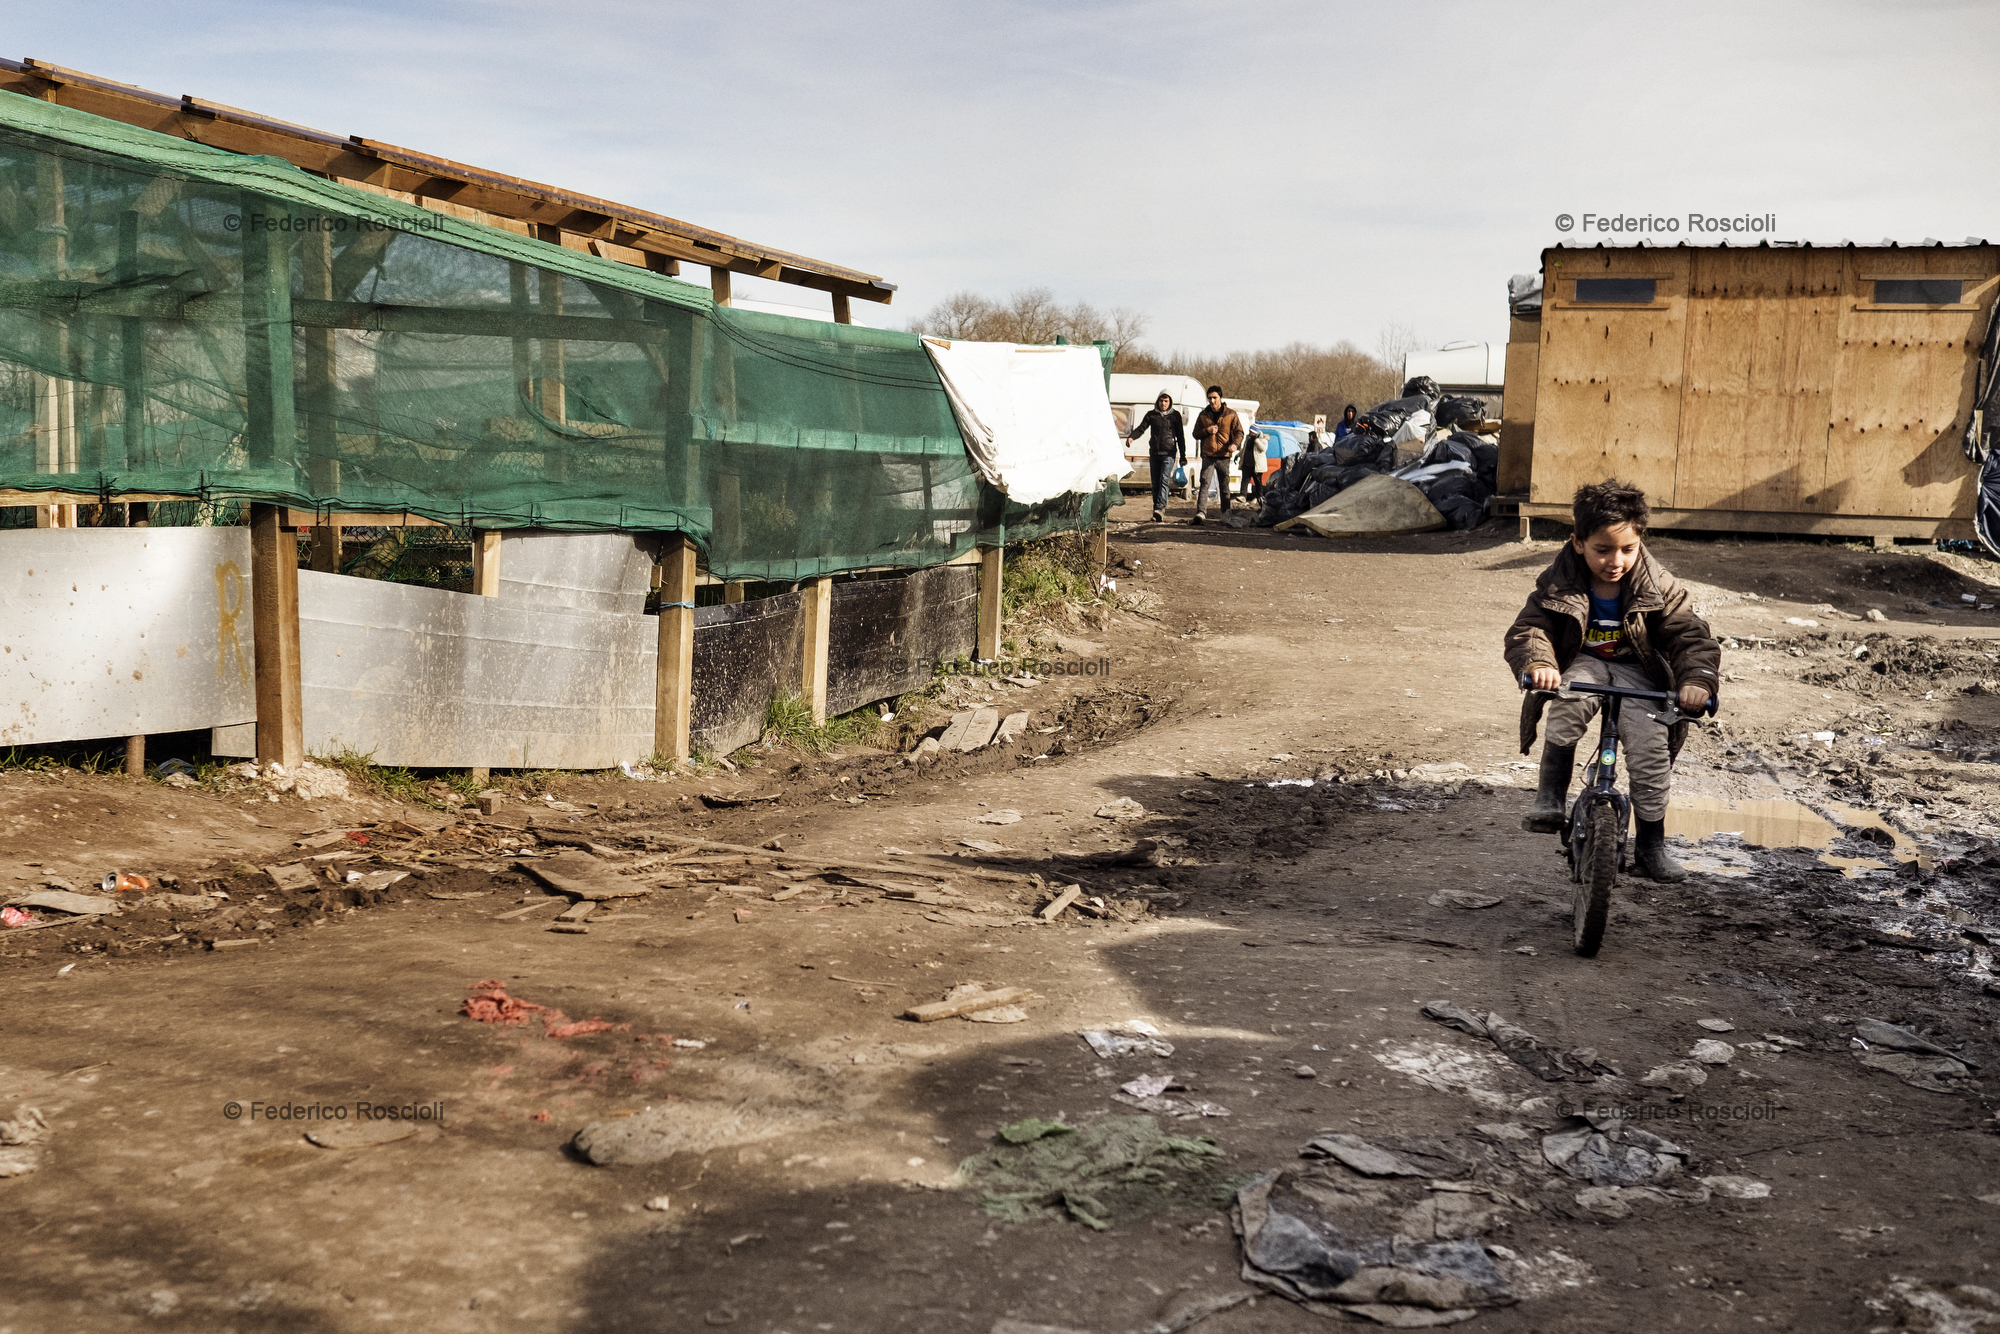 Calais, France. February 28, 2016. More than 300 children are hosted inside the camp and the majority of them are unaccompanied.